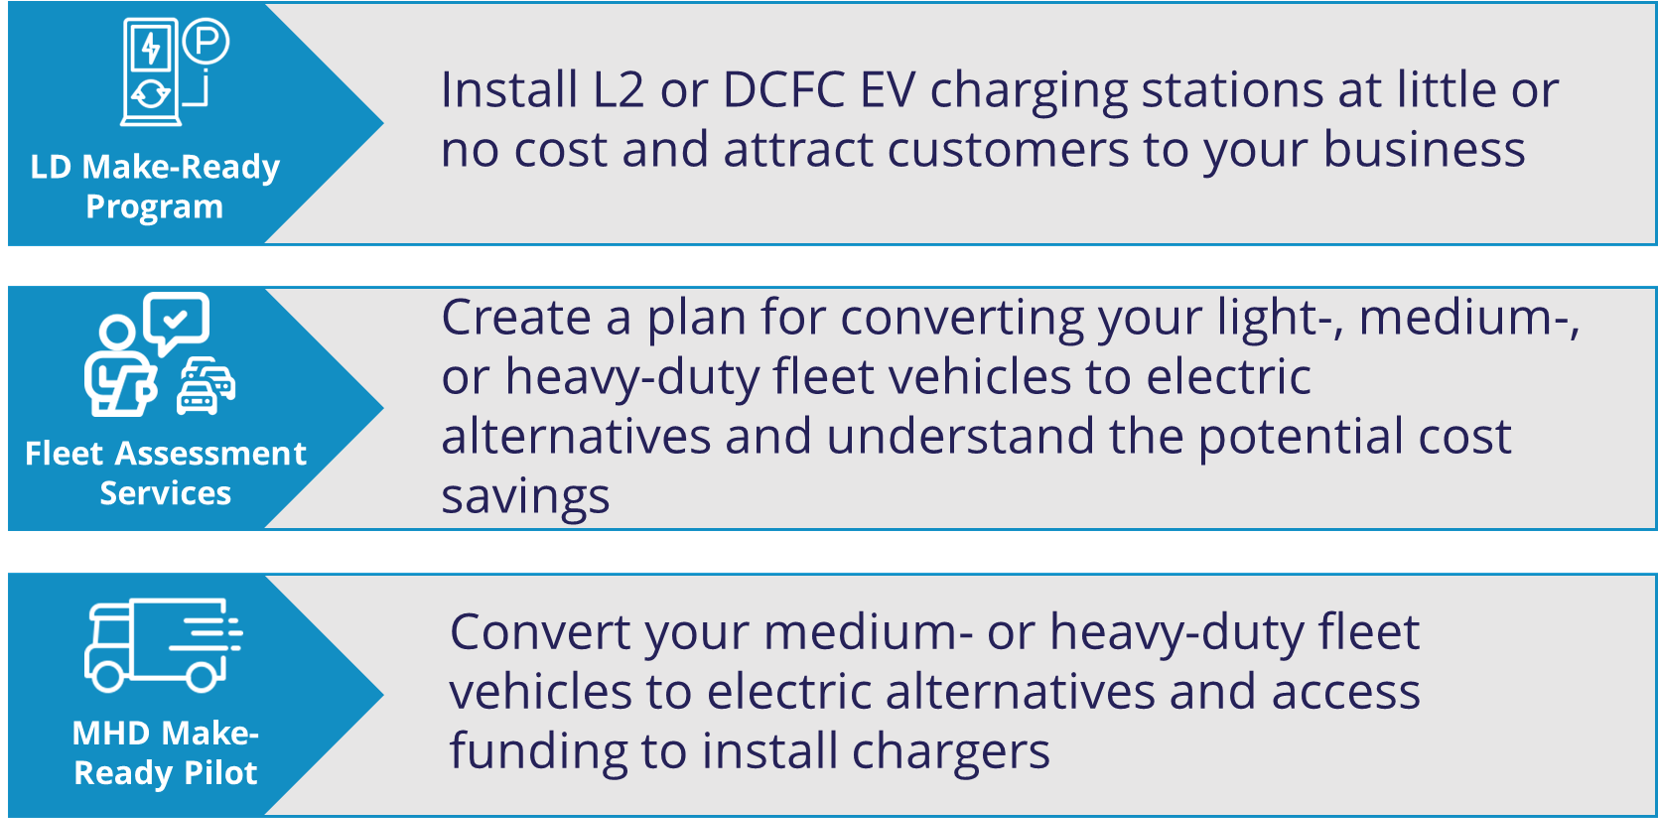 Graphic showing components of EV Make-Ready Program